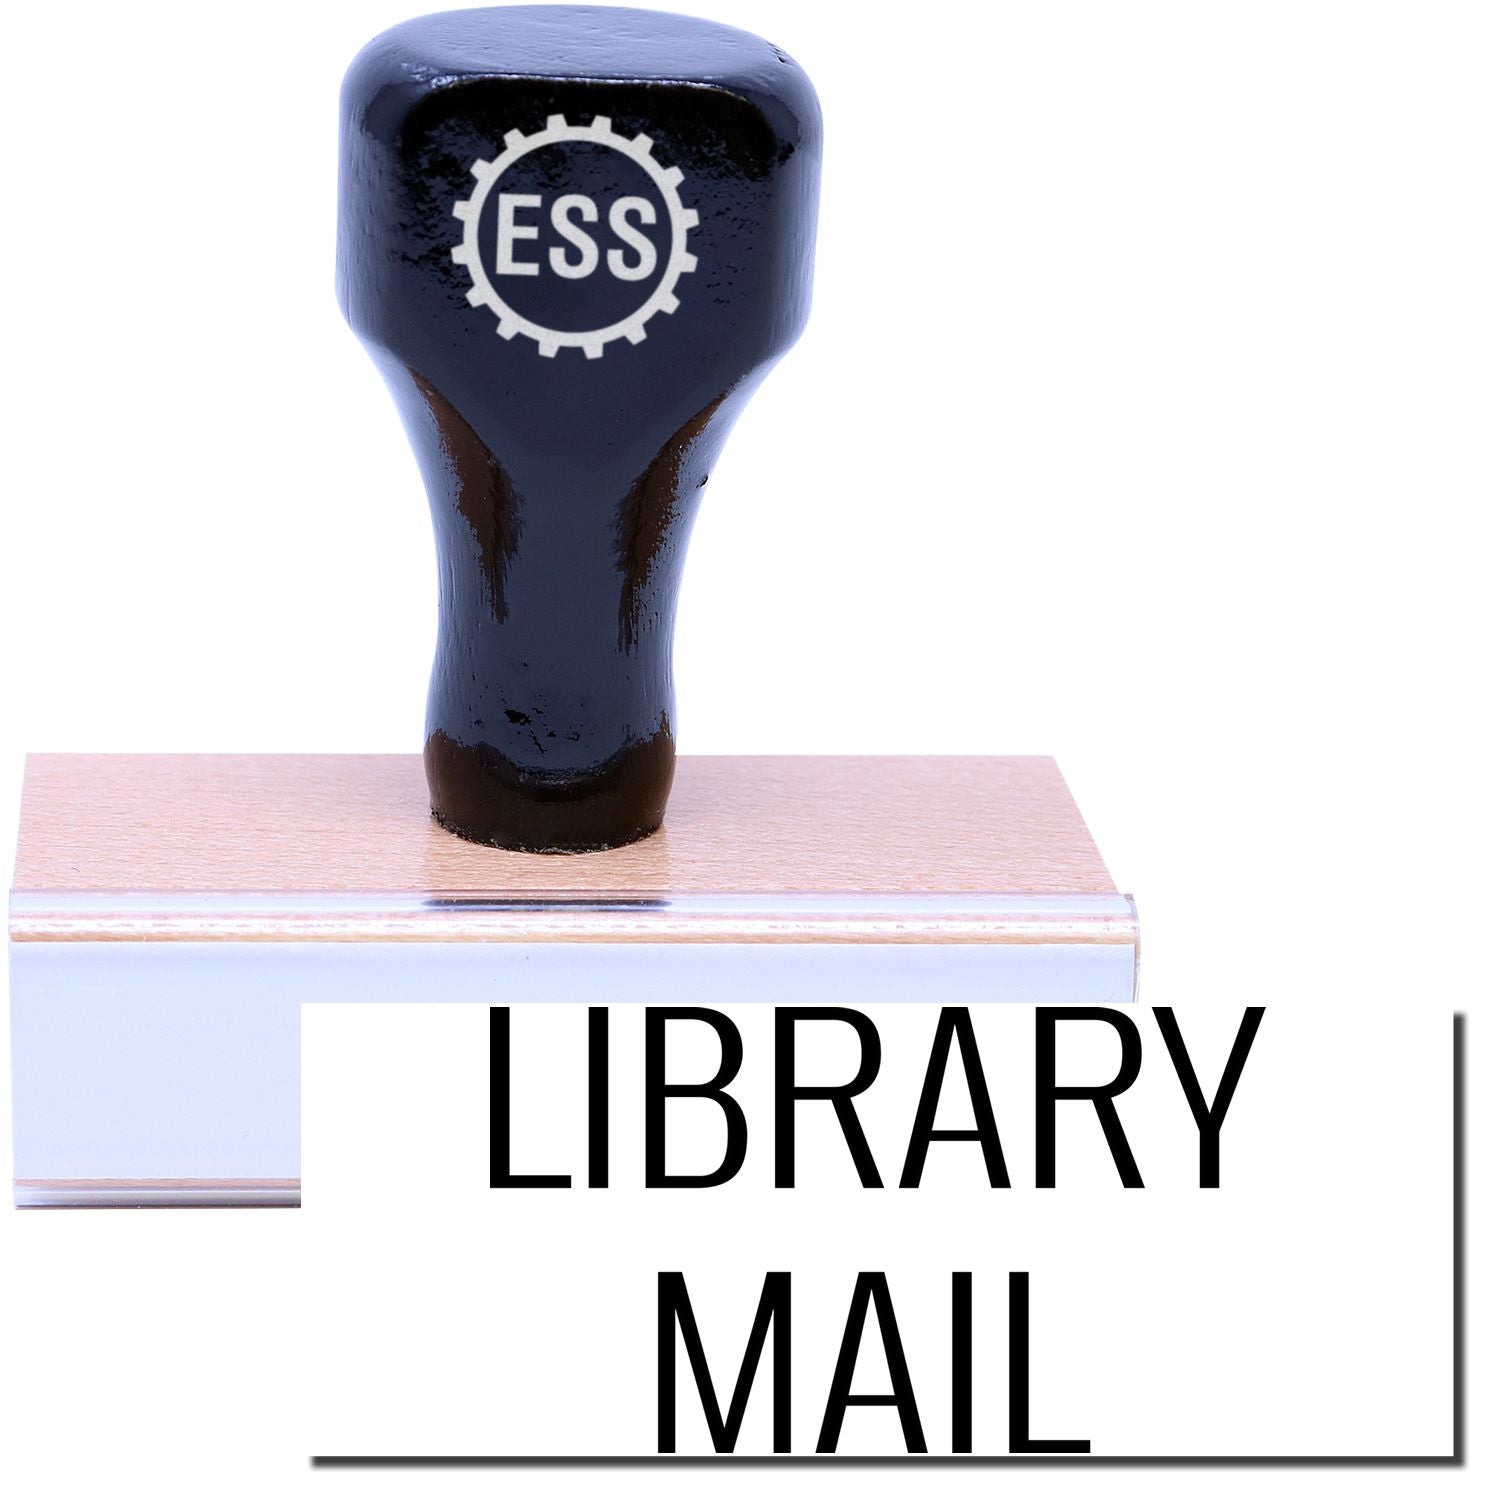 A stock office rubber stamp with a stamped image showing how the text "LIBRARY MAIL" is displayed after stamping.